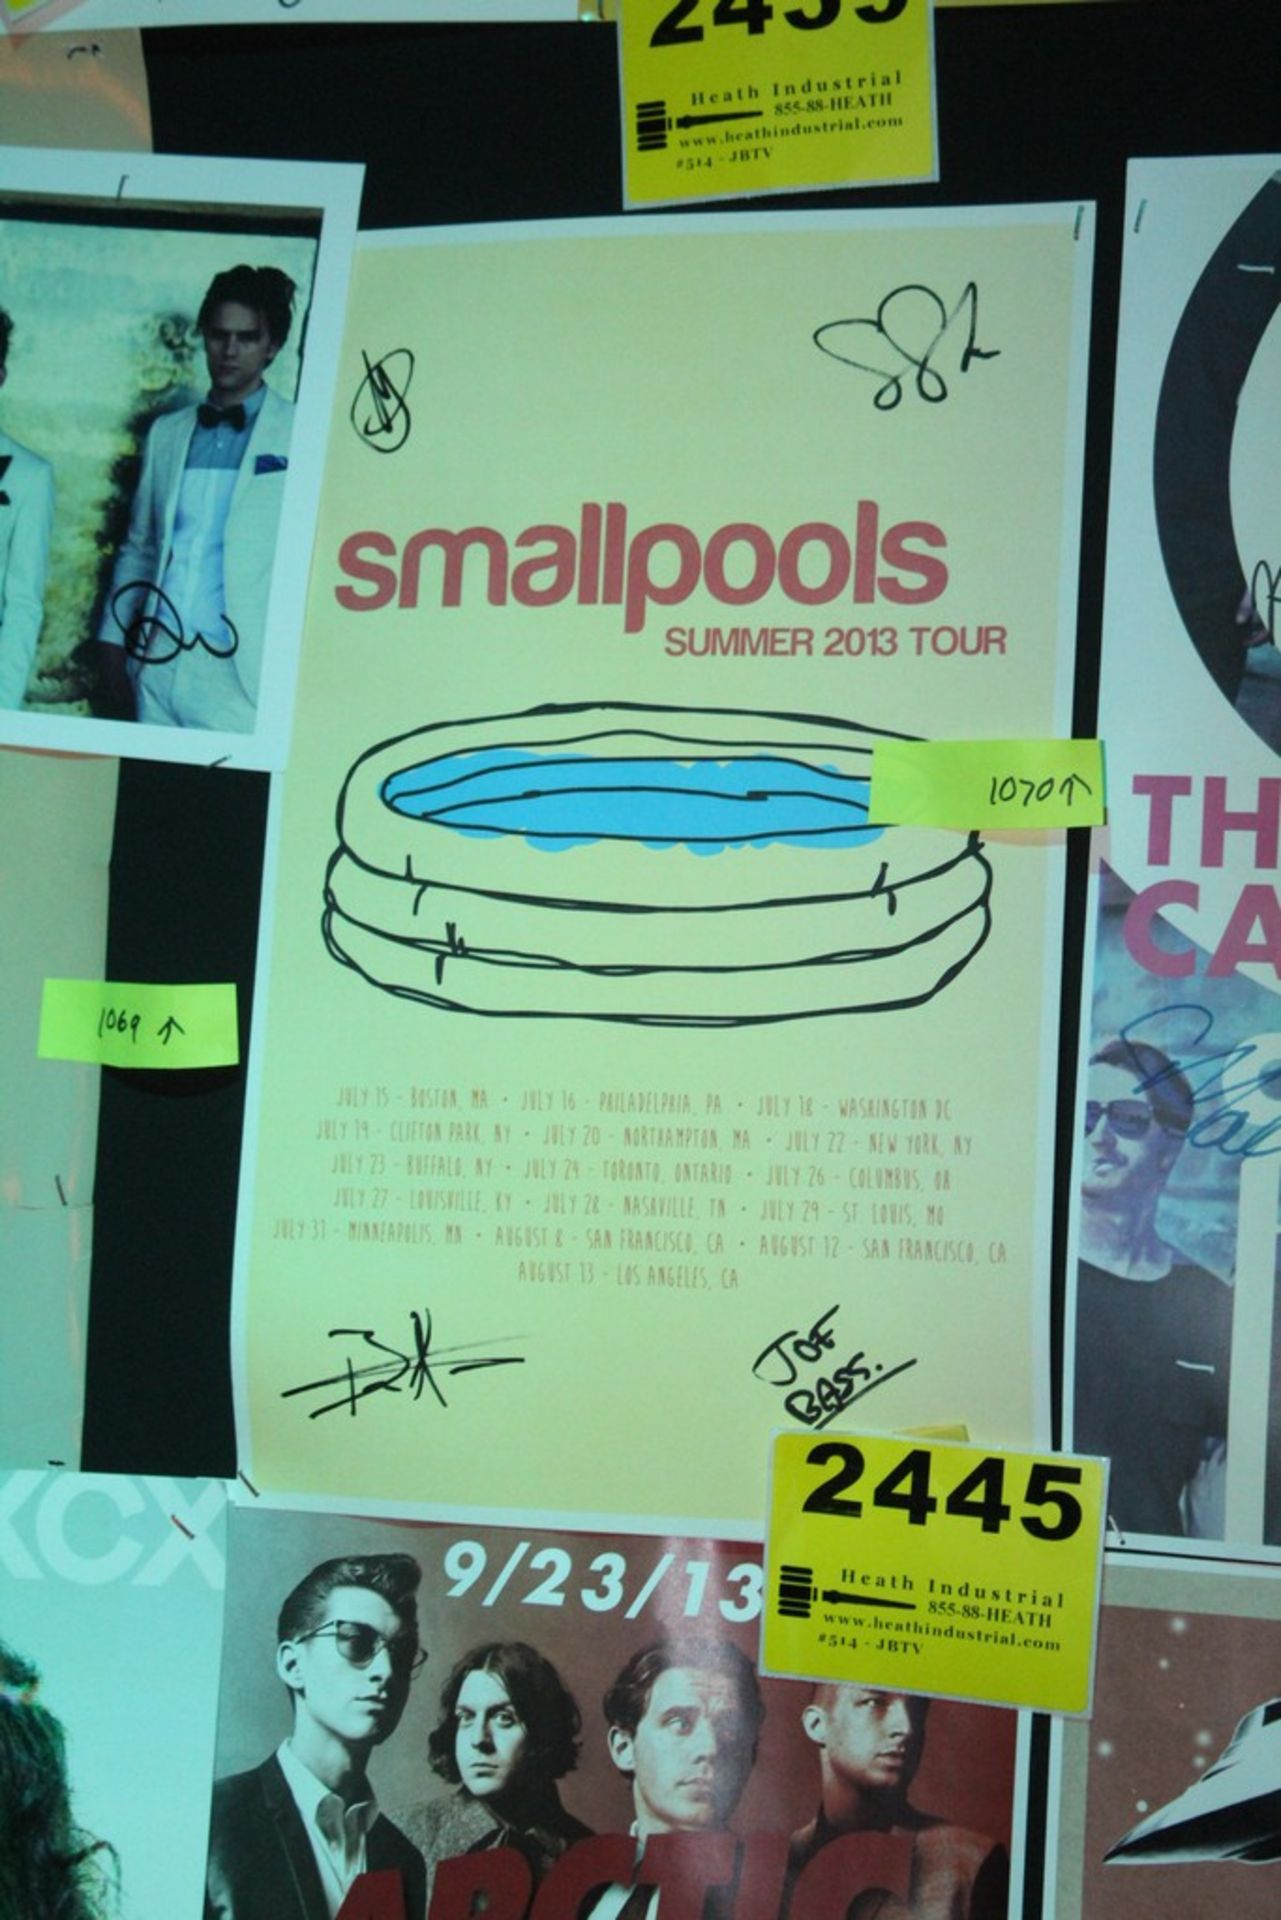 Smallpools Signed Poster - Damaged